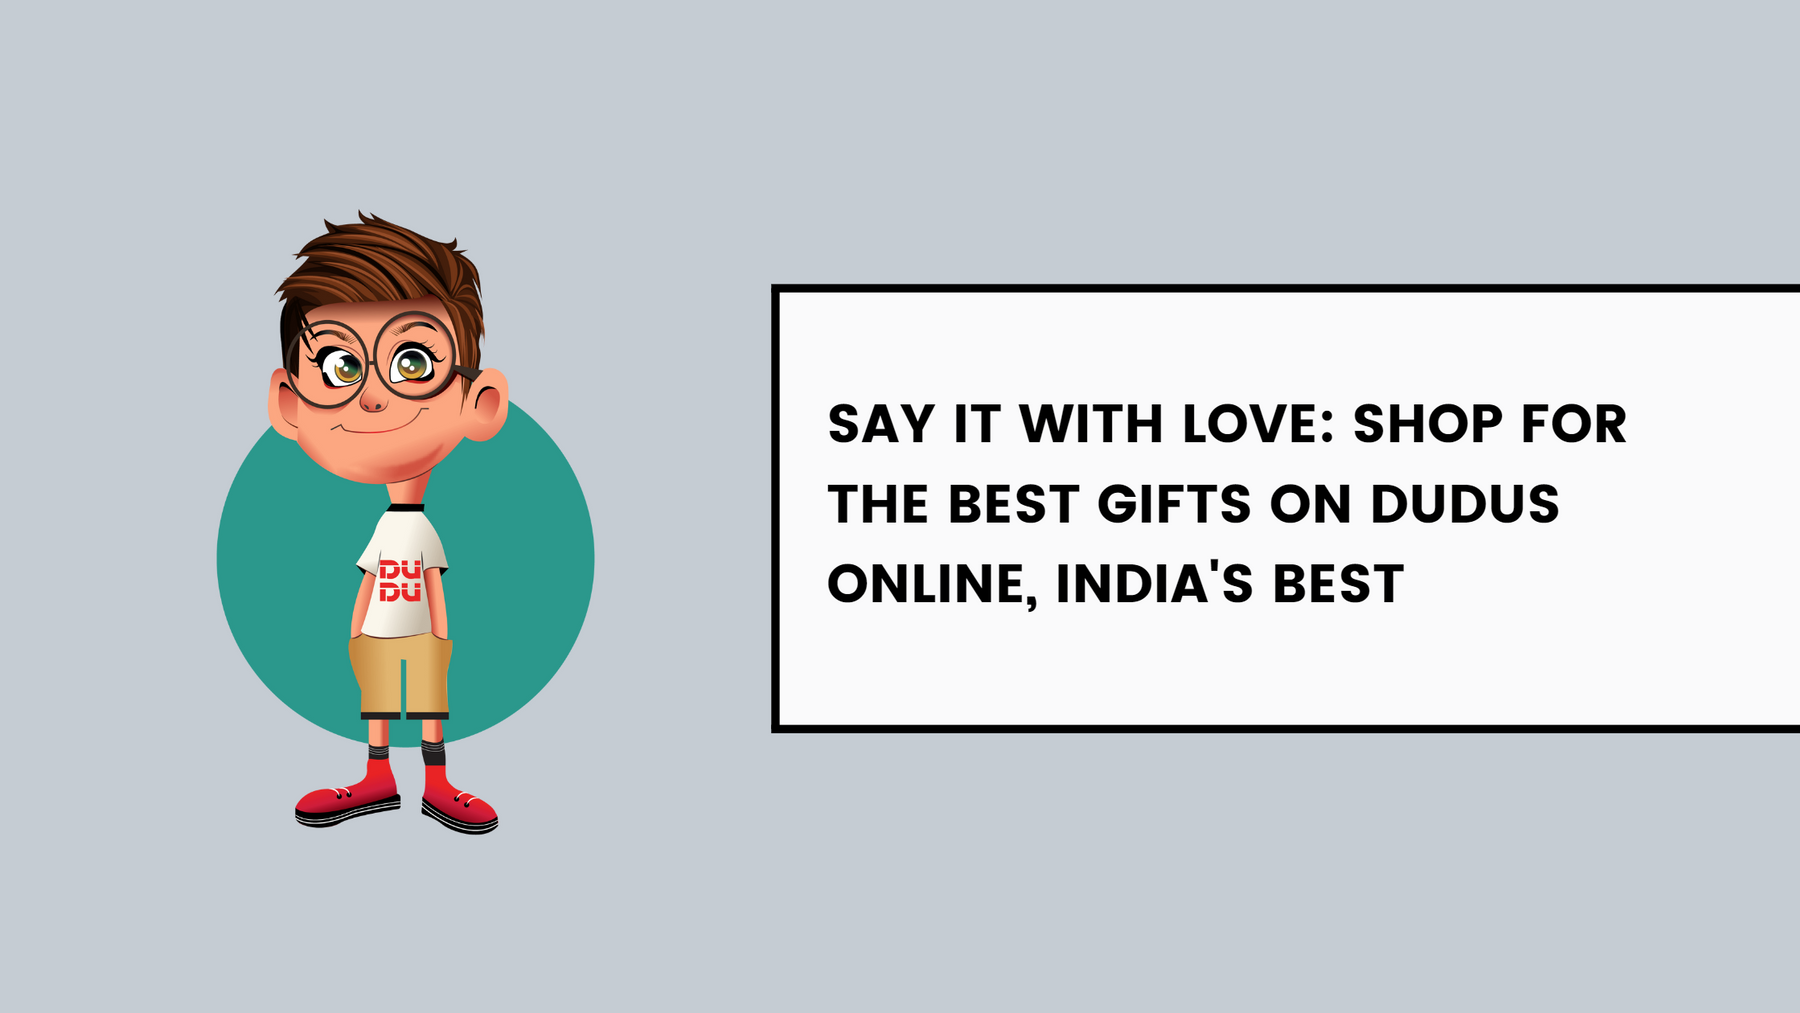 Say It With Love: Shop For The Best Gifts On Dudus Online, India's Best